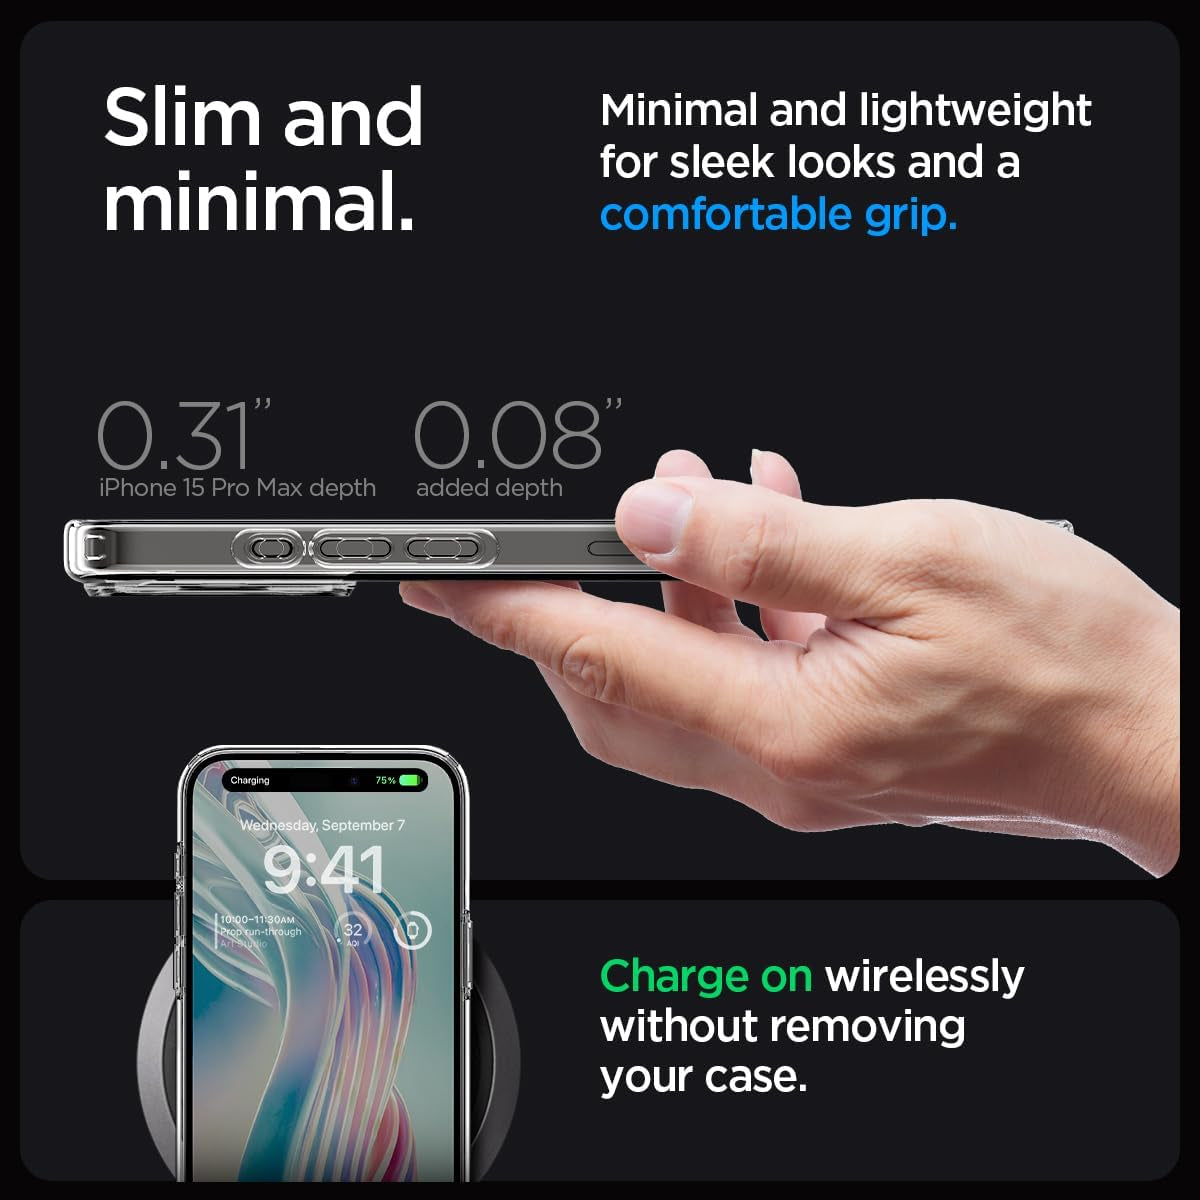 Spigen Ultra Hybrid Crystal Clear Military Grade Shockproof Case - For iPhone 15 Pro Max - mosaccessories